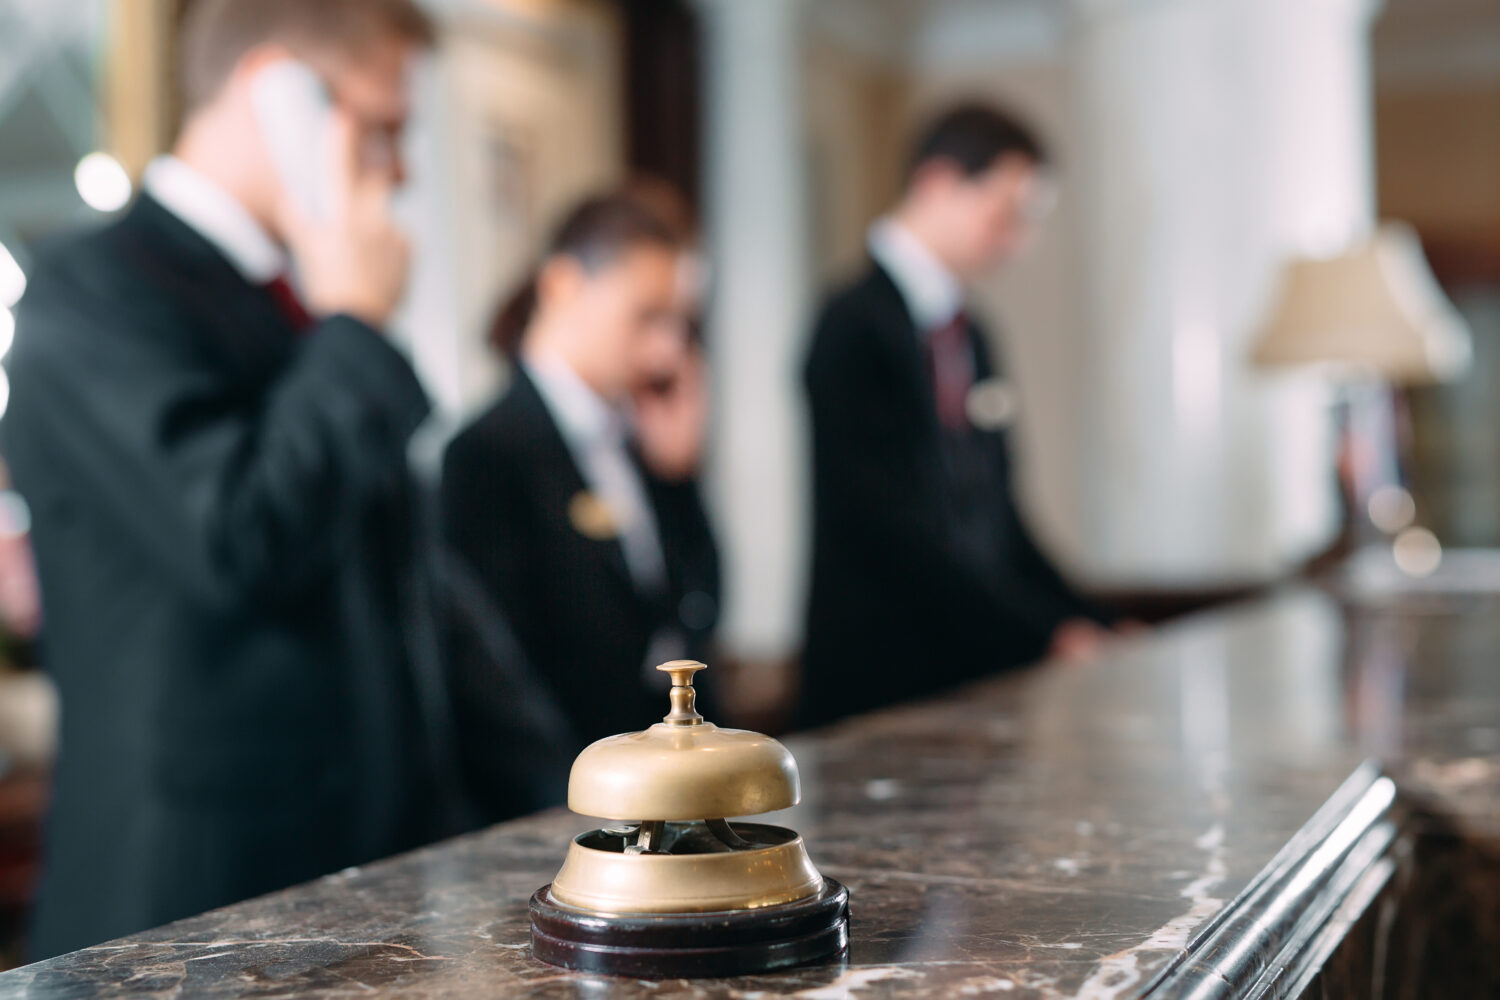 hotel service bell at front desk